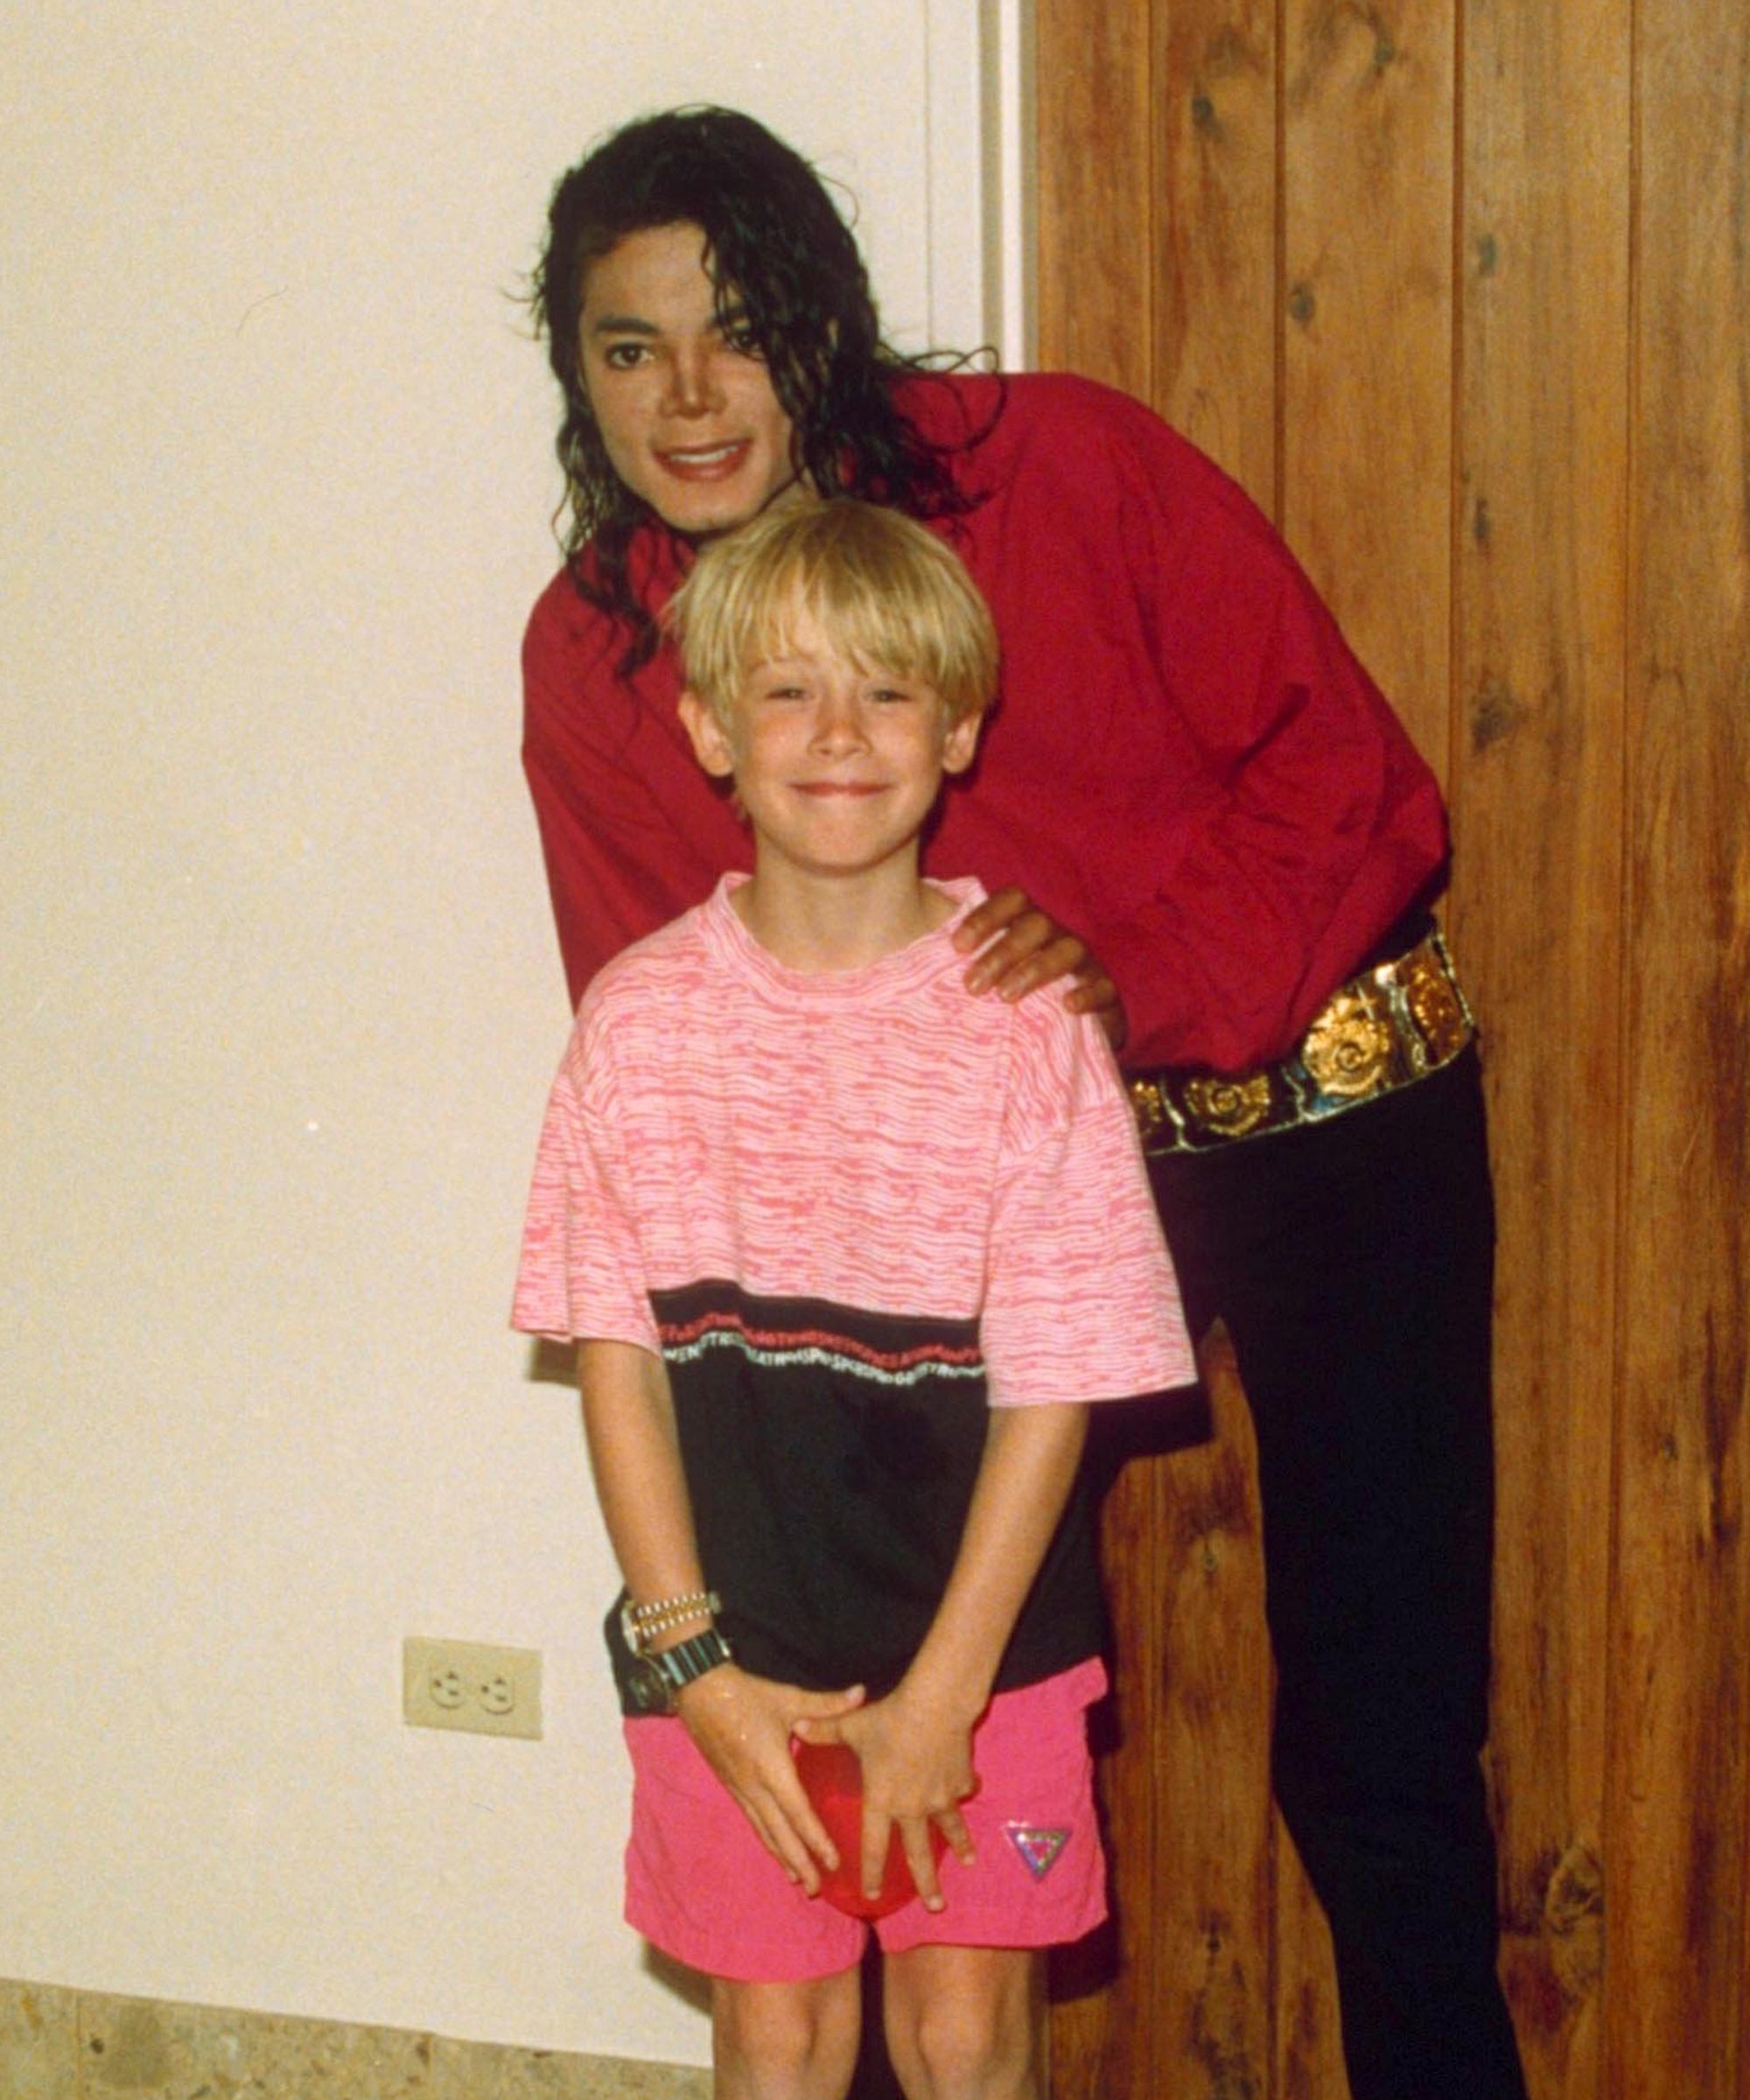 Macaulay Culkin speaks out about his friendship with Michael Jackson: He  never did anything to me